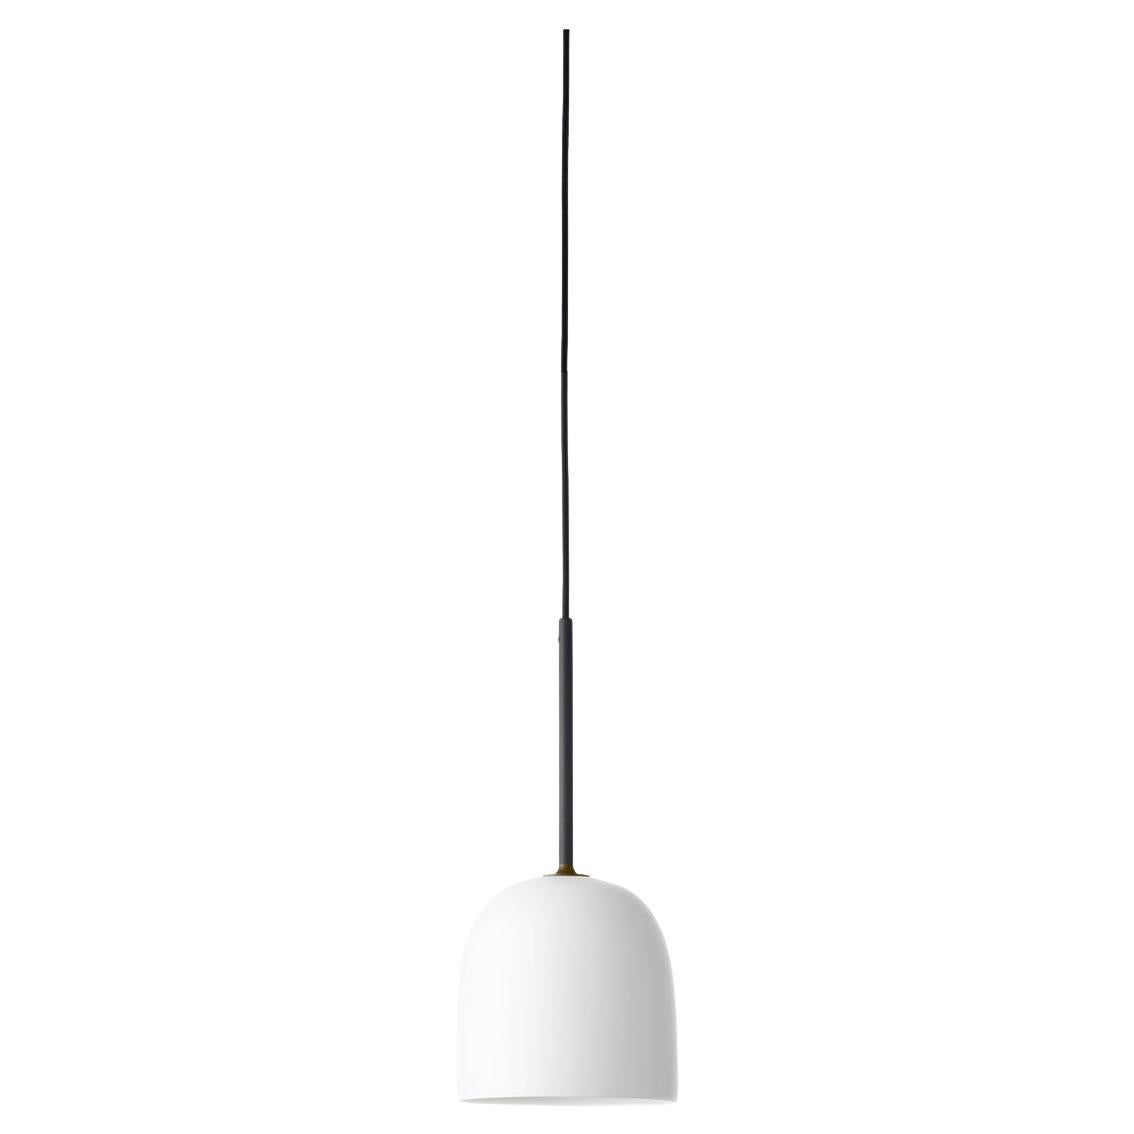 Warmth, strength and subtlety define the Howard Pendant Lamp – Space Copenhagen’s distinctly Scandinavian celebration of New York’s industrial palette.

Abundant with material and atmospheric references from the SoHo location of the Howard Hotel,